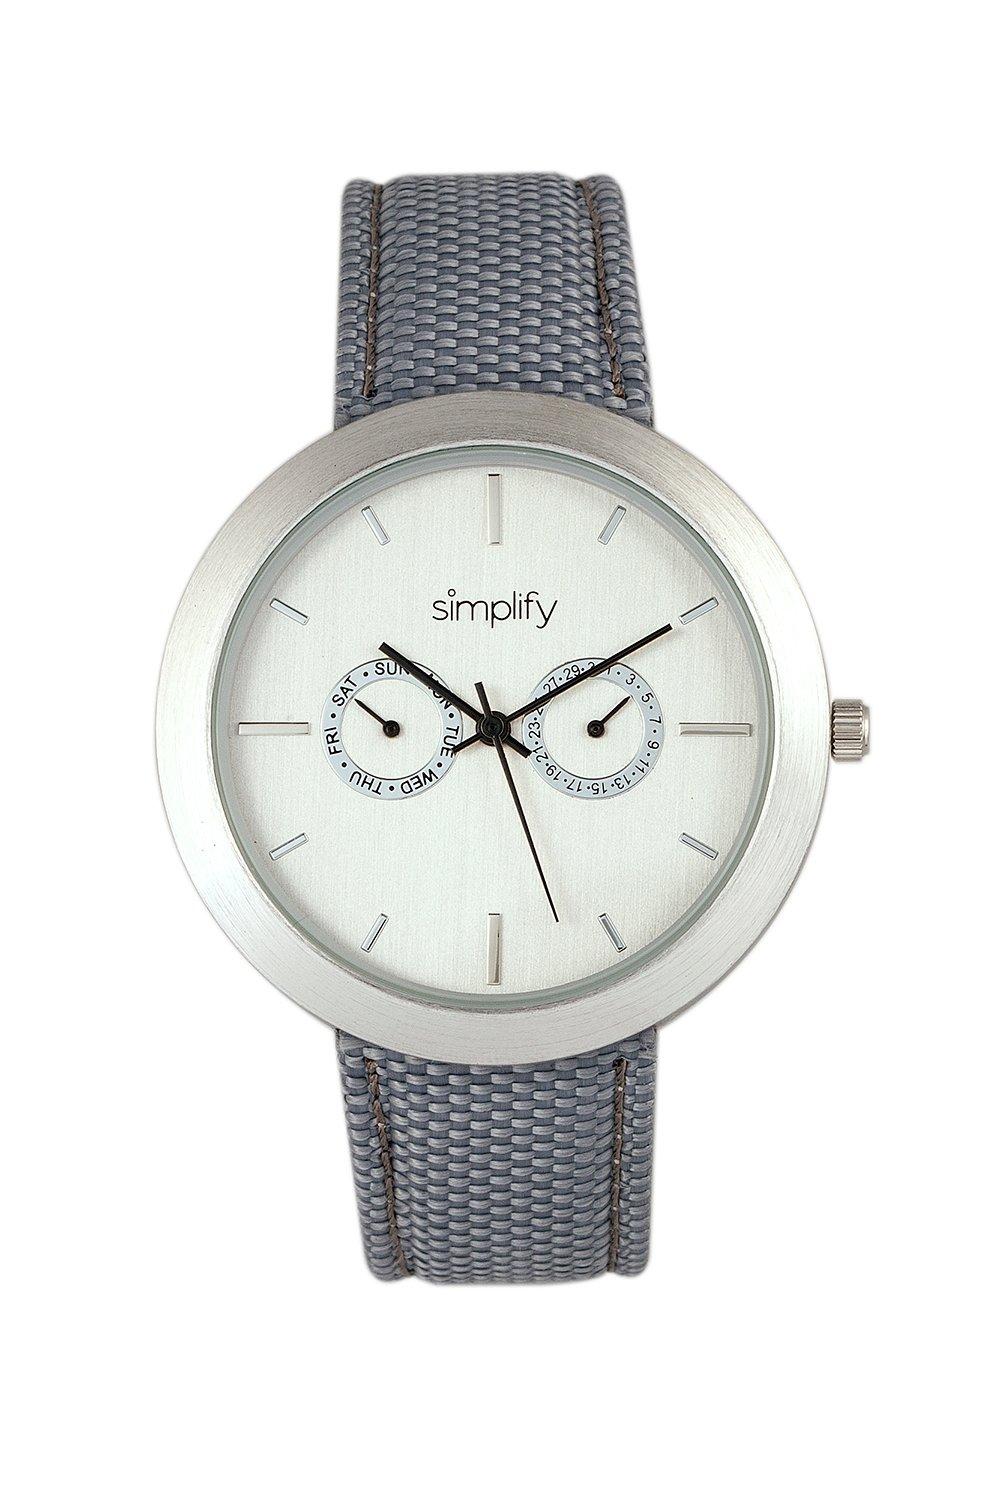 The 6100 Canvas-Overlaid Strap Watch with Day & Date